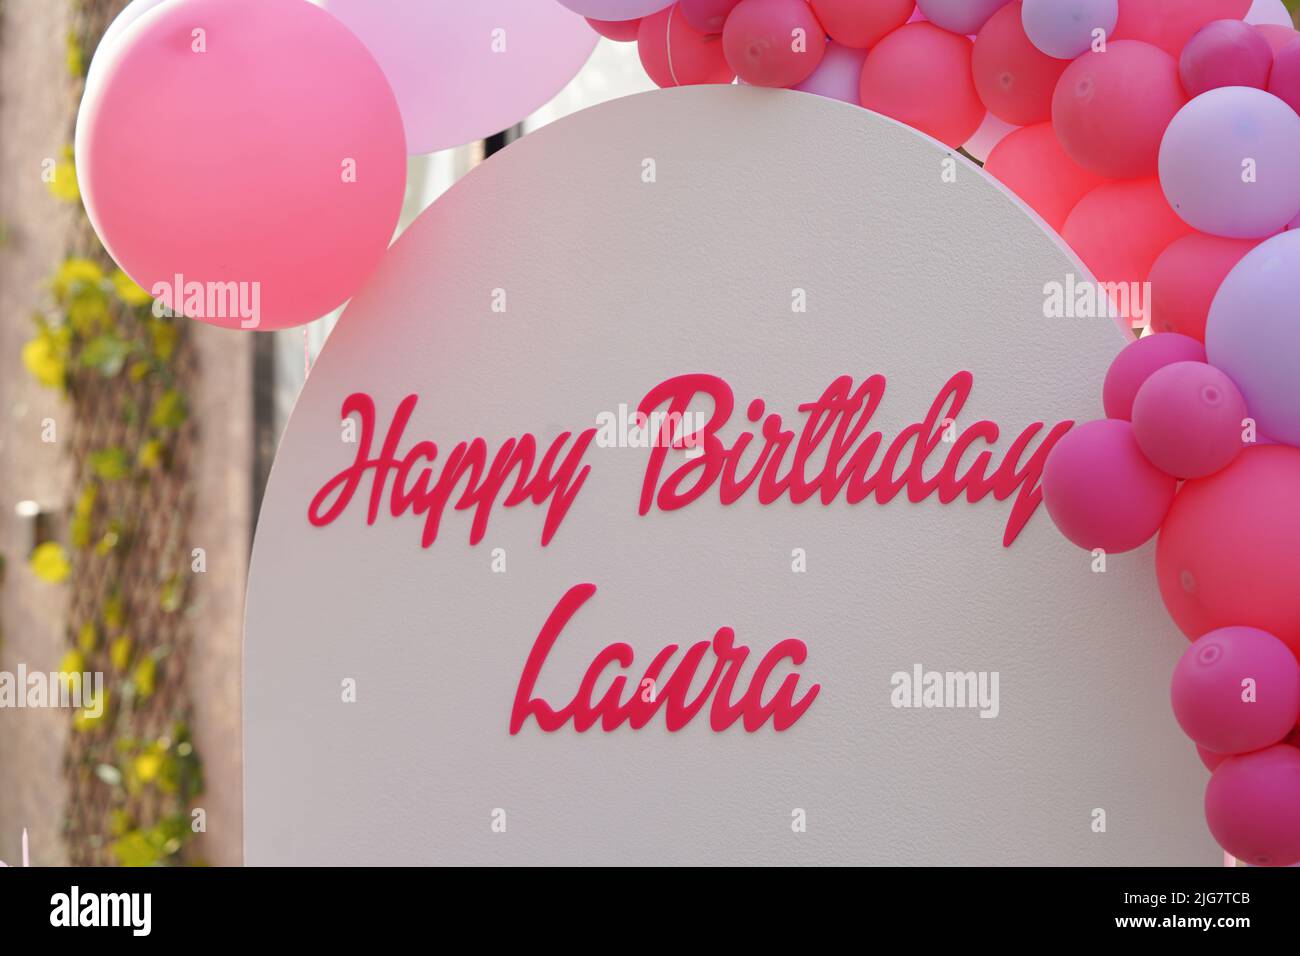 Happy birthday Laura banner, background with pink and purple balloons and some grass on the wall. Stock Photo